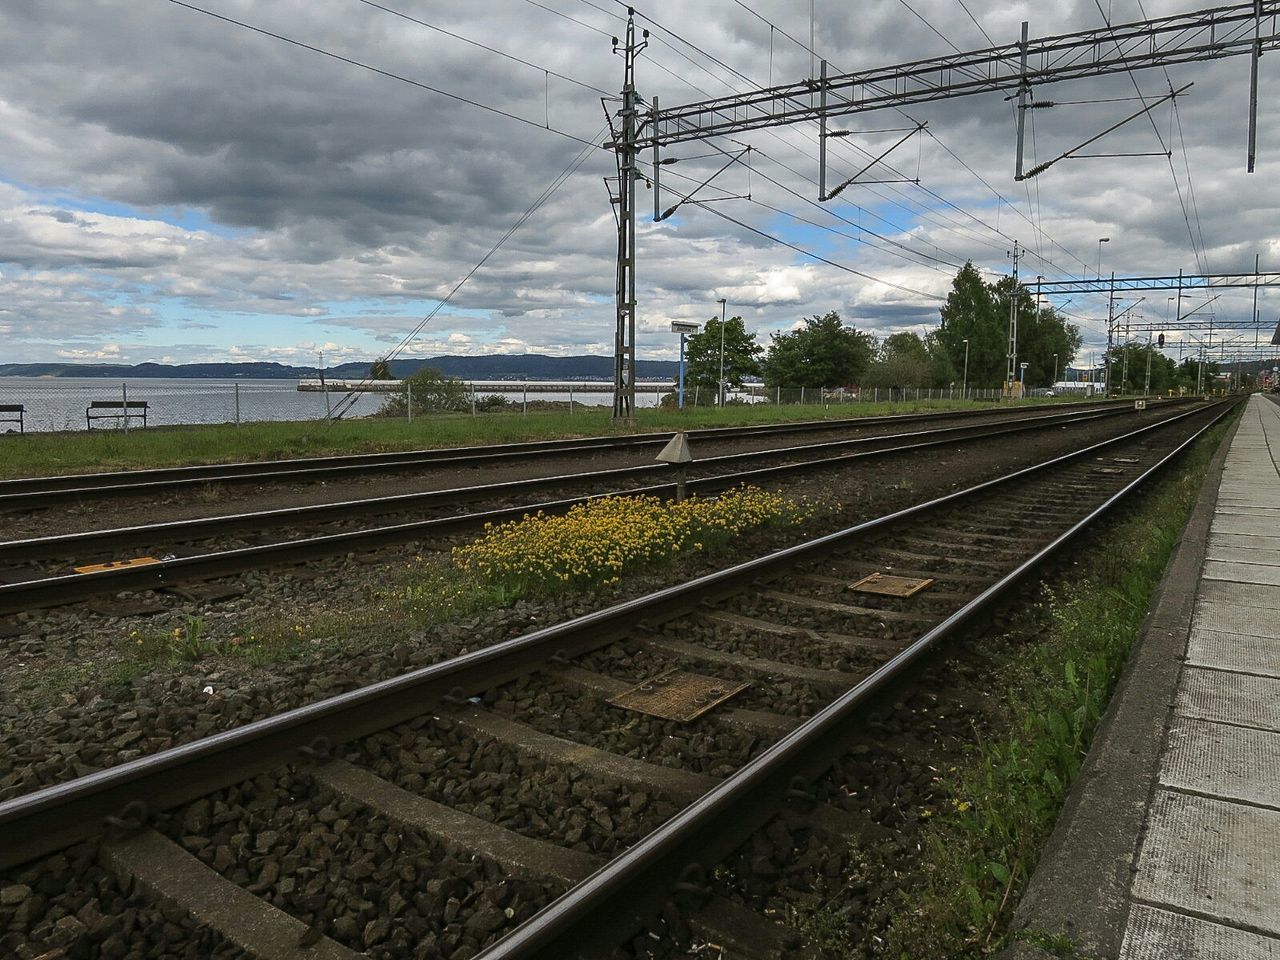 railroad track, rail transportation, public transportation, transportation, sky, railroad station, railroad station platform, cloud - sky, railway track, power line, train - vehicle, electricity pylon, cloudy, power supply, diminishing perspective, cloud, cable, vanishing point, day, travel